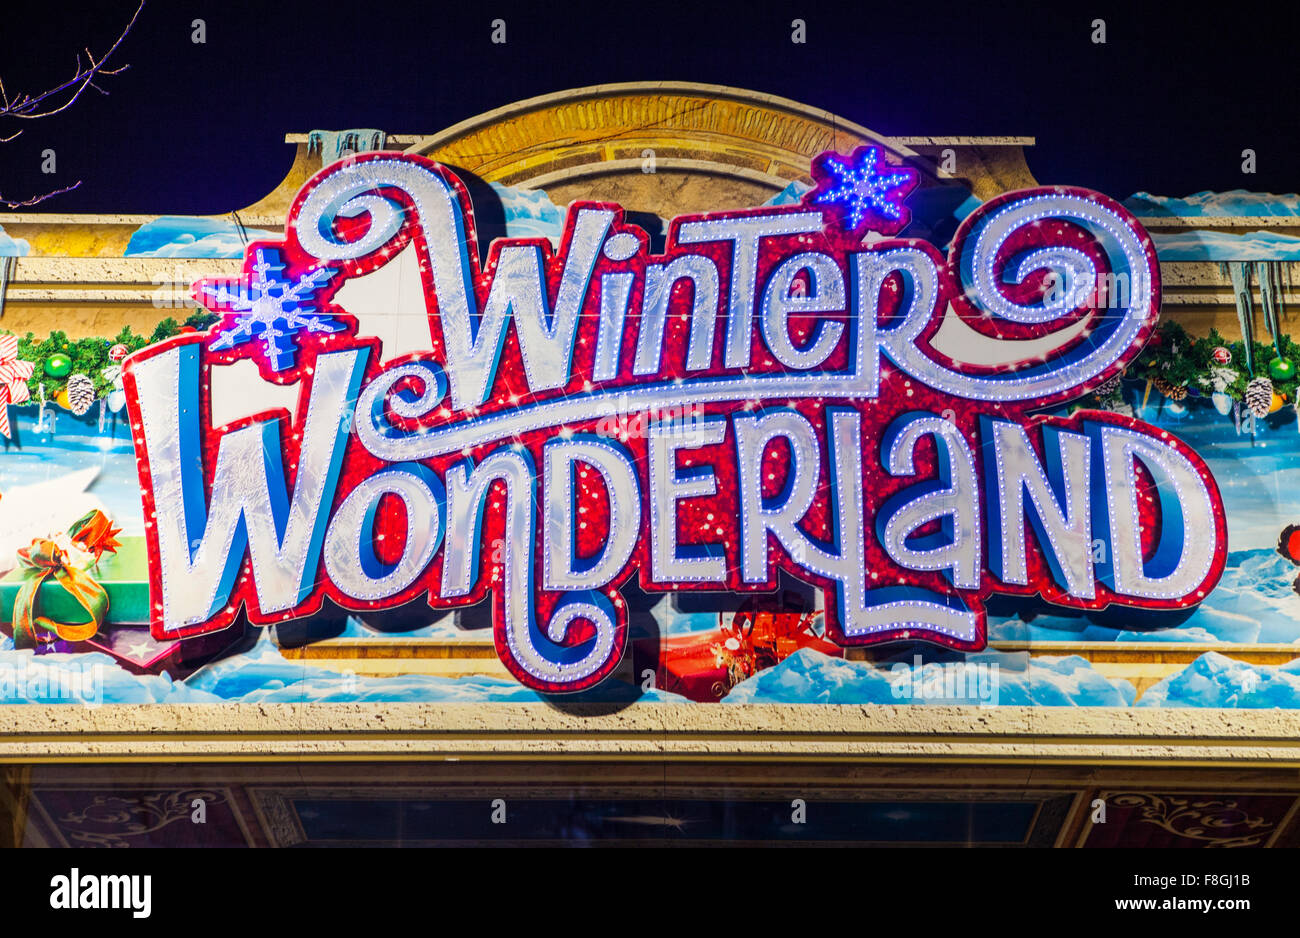 LONDON, UK - DECEMBER 9TH 2015: The entrance sign for the annual Winter Wonderland Christmas event in Hyde Park, London on 9th D Stock Photo